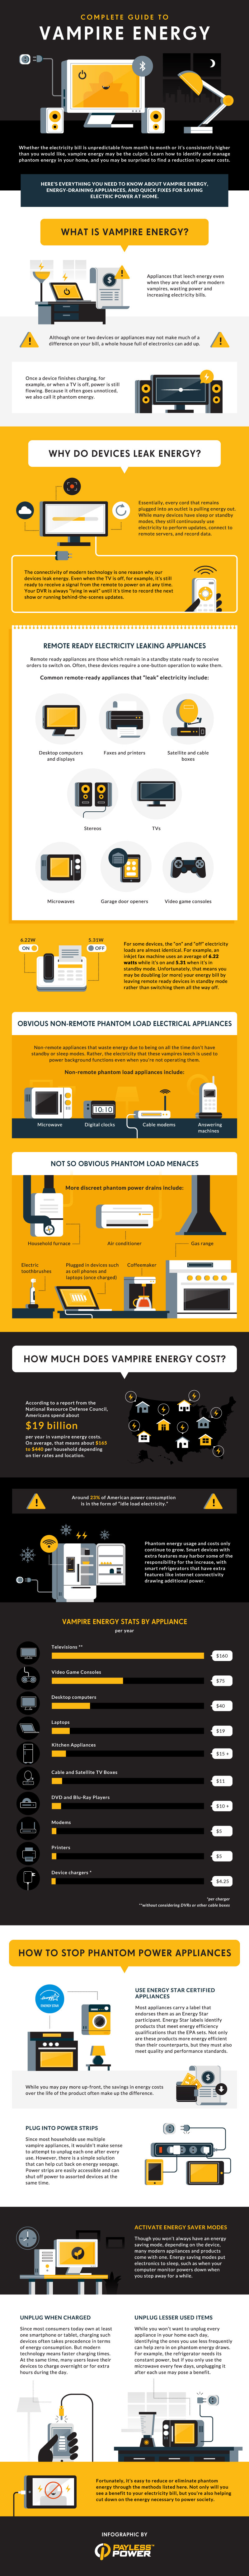 Infographic for Complete Guide to Vampire Energy